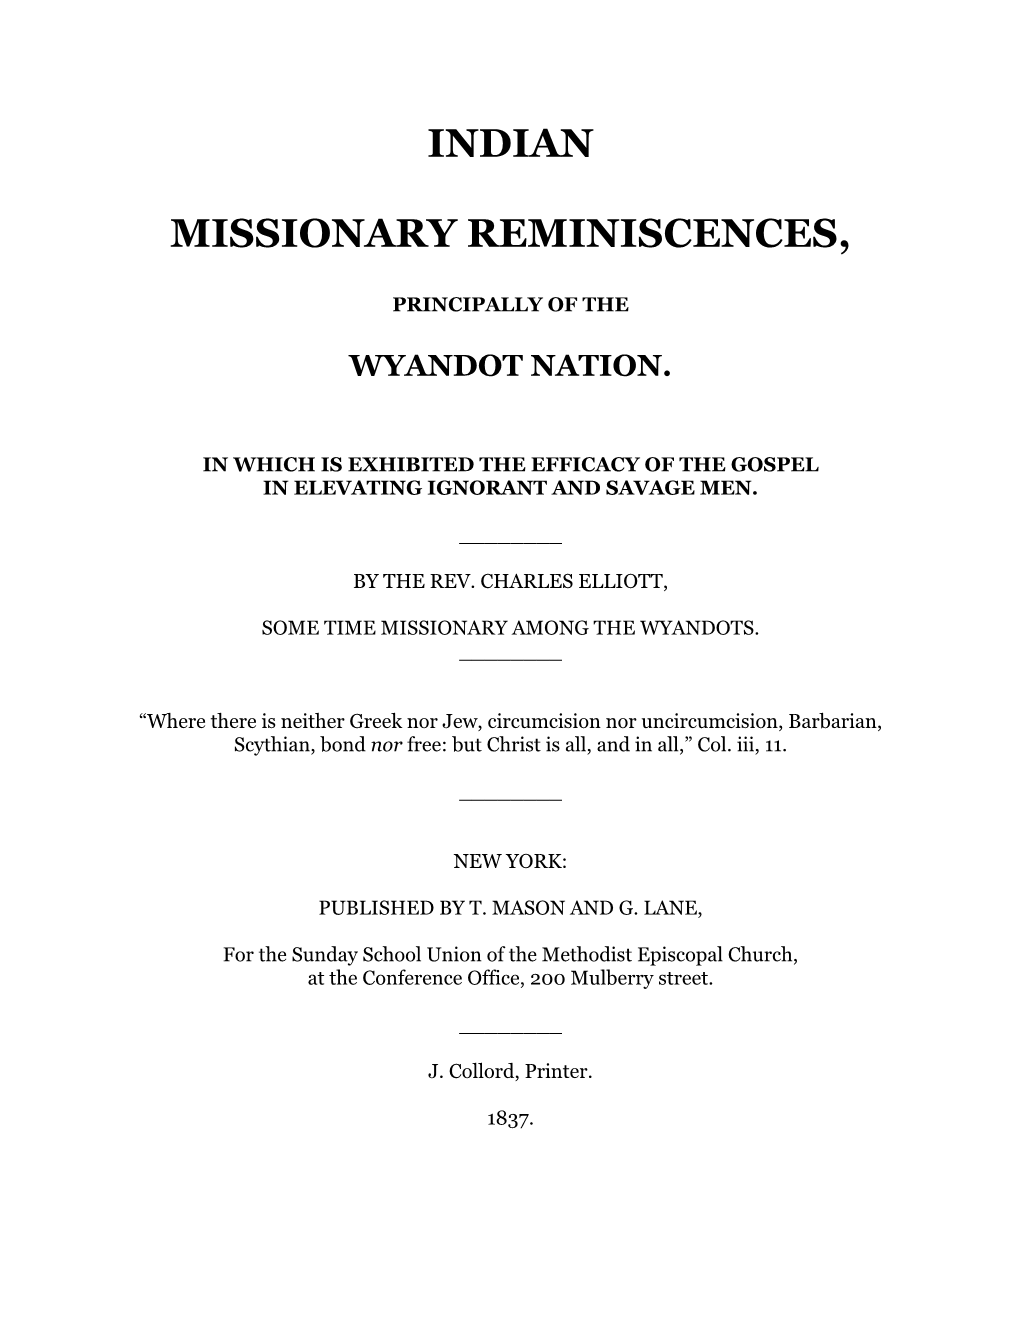 Indian Missionary Reminiscences.Pages